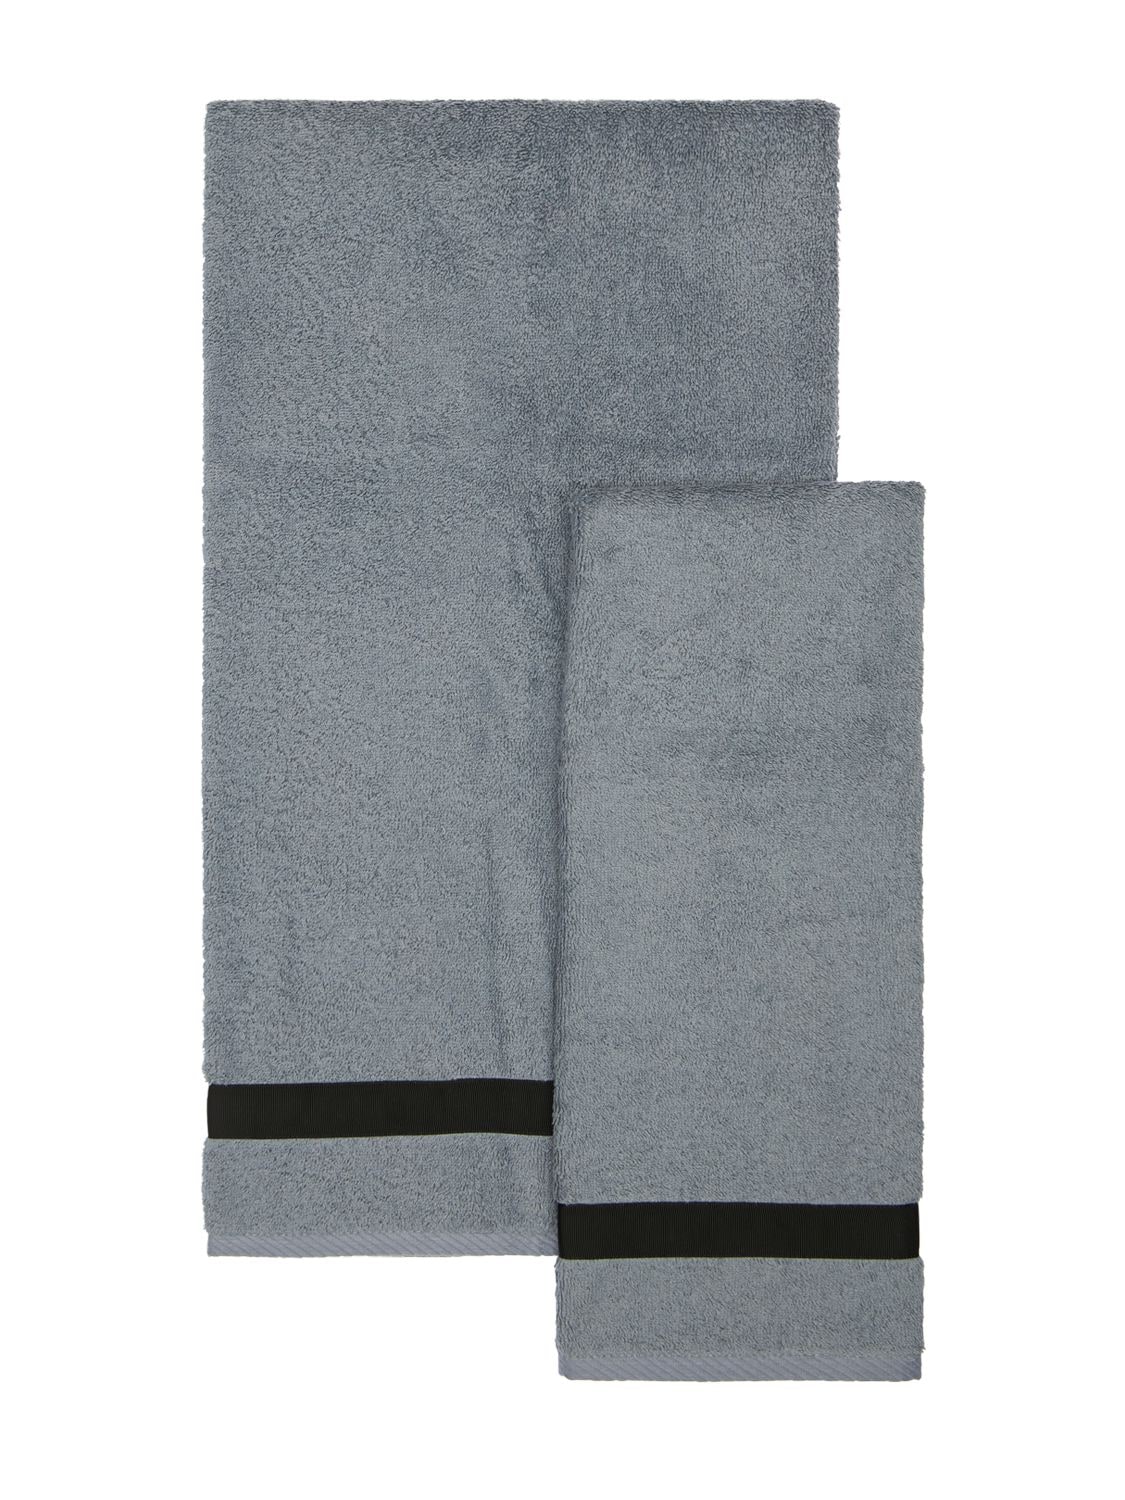 Alessandro Di Marco Set Of 2 Cotton Terrycloth Towels In 蓝色